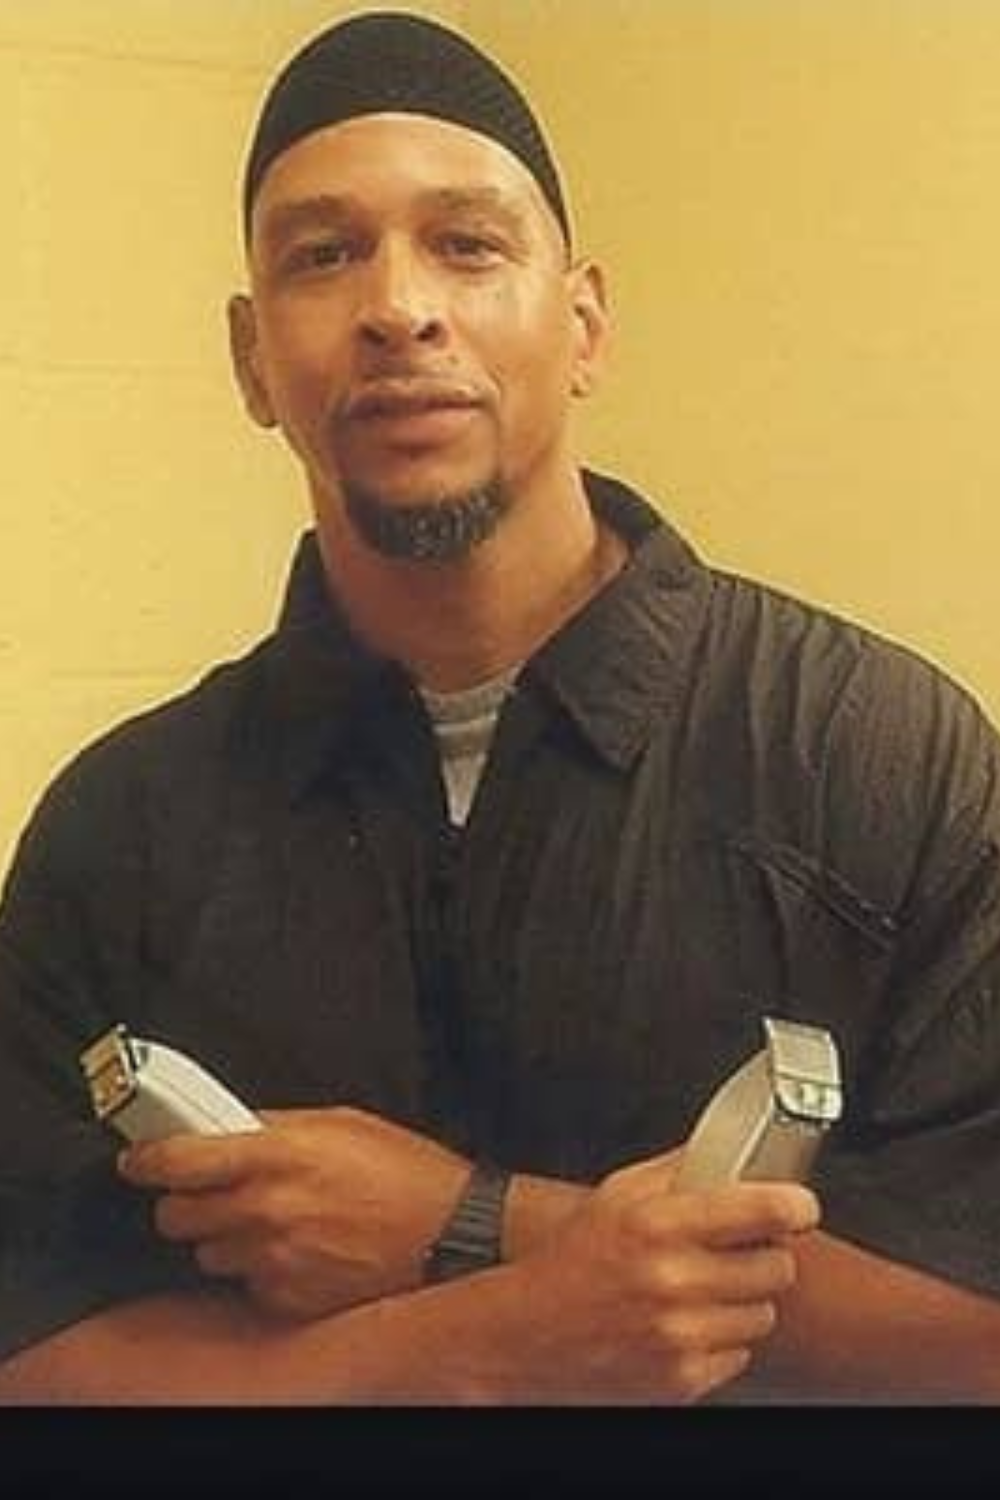 Former NFL Player And Convicted Murderer Rae Carruth